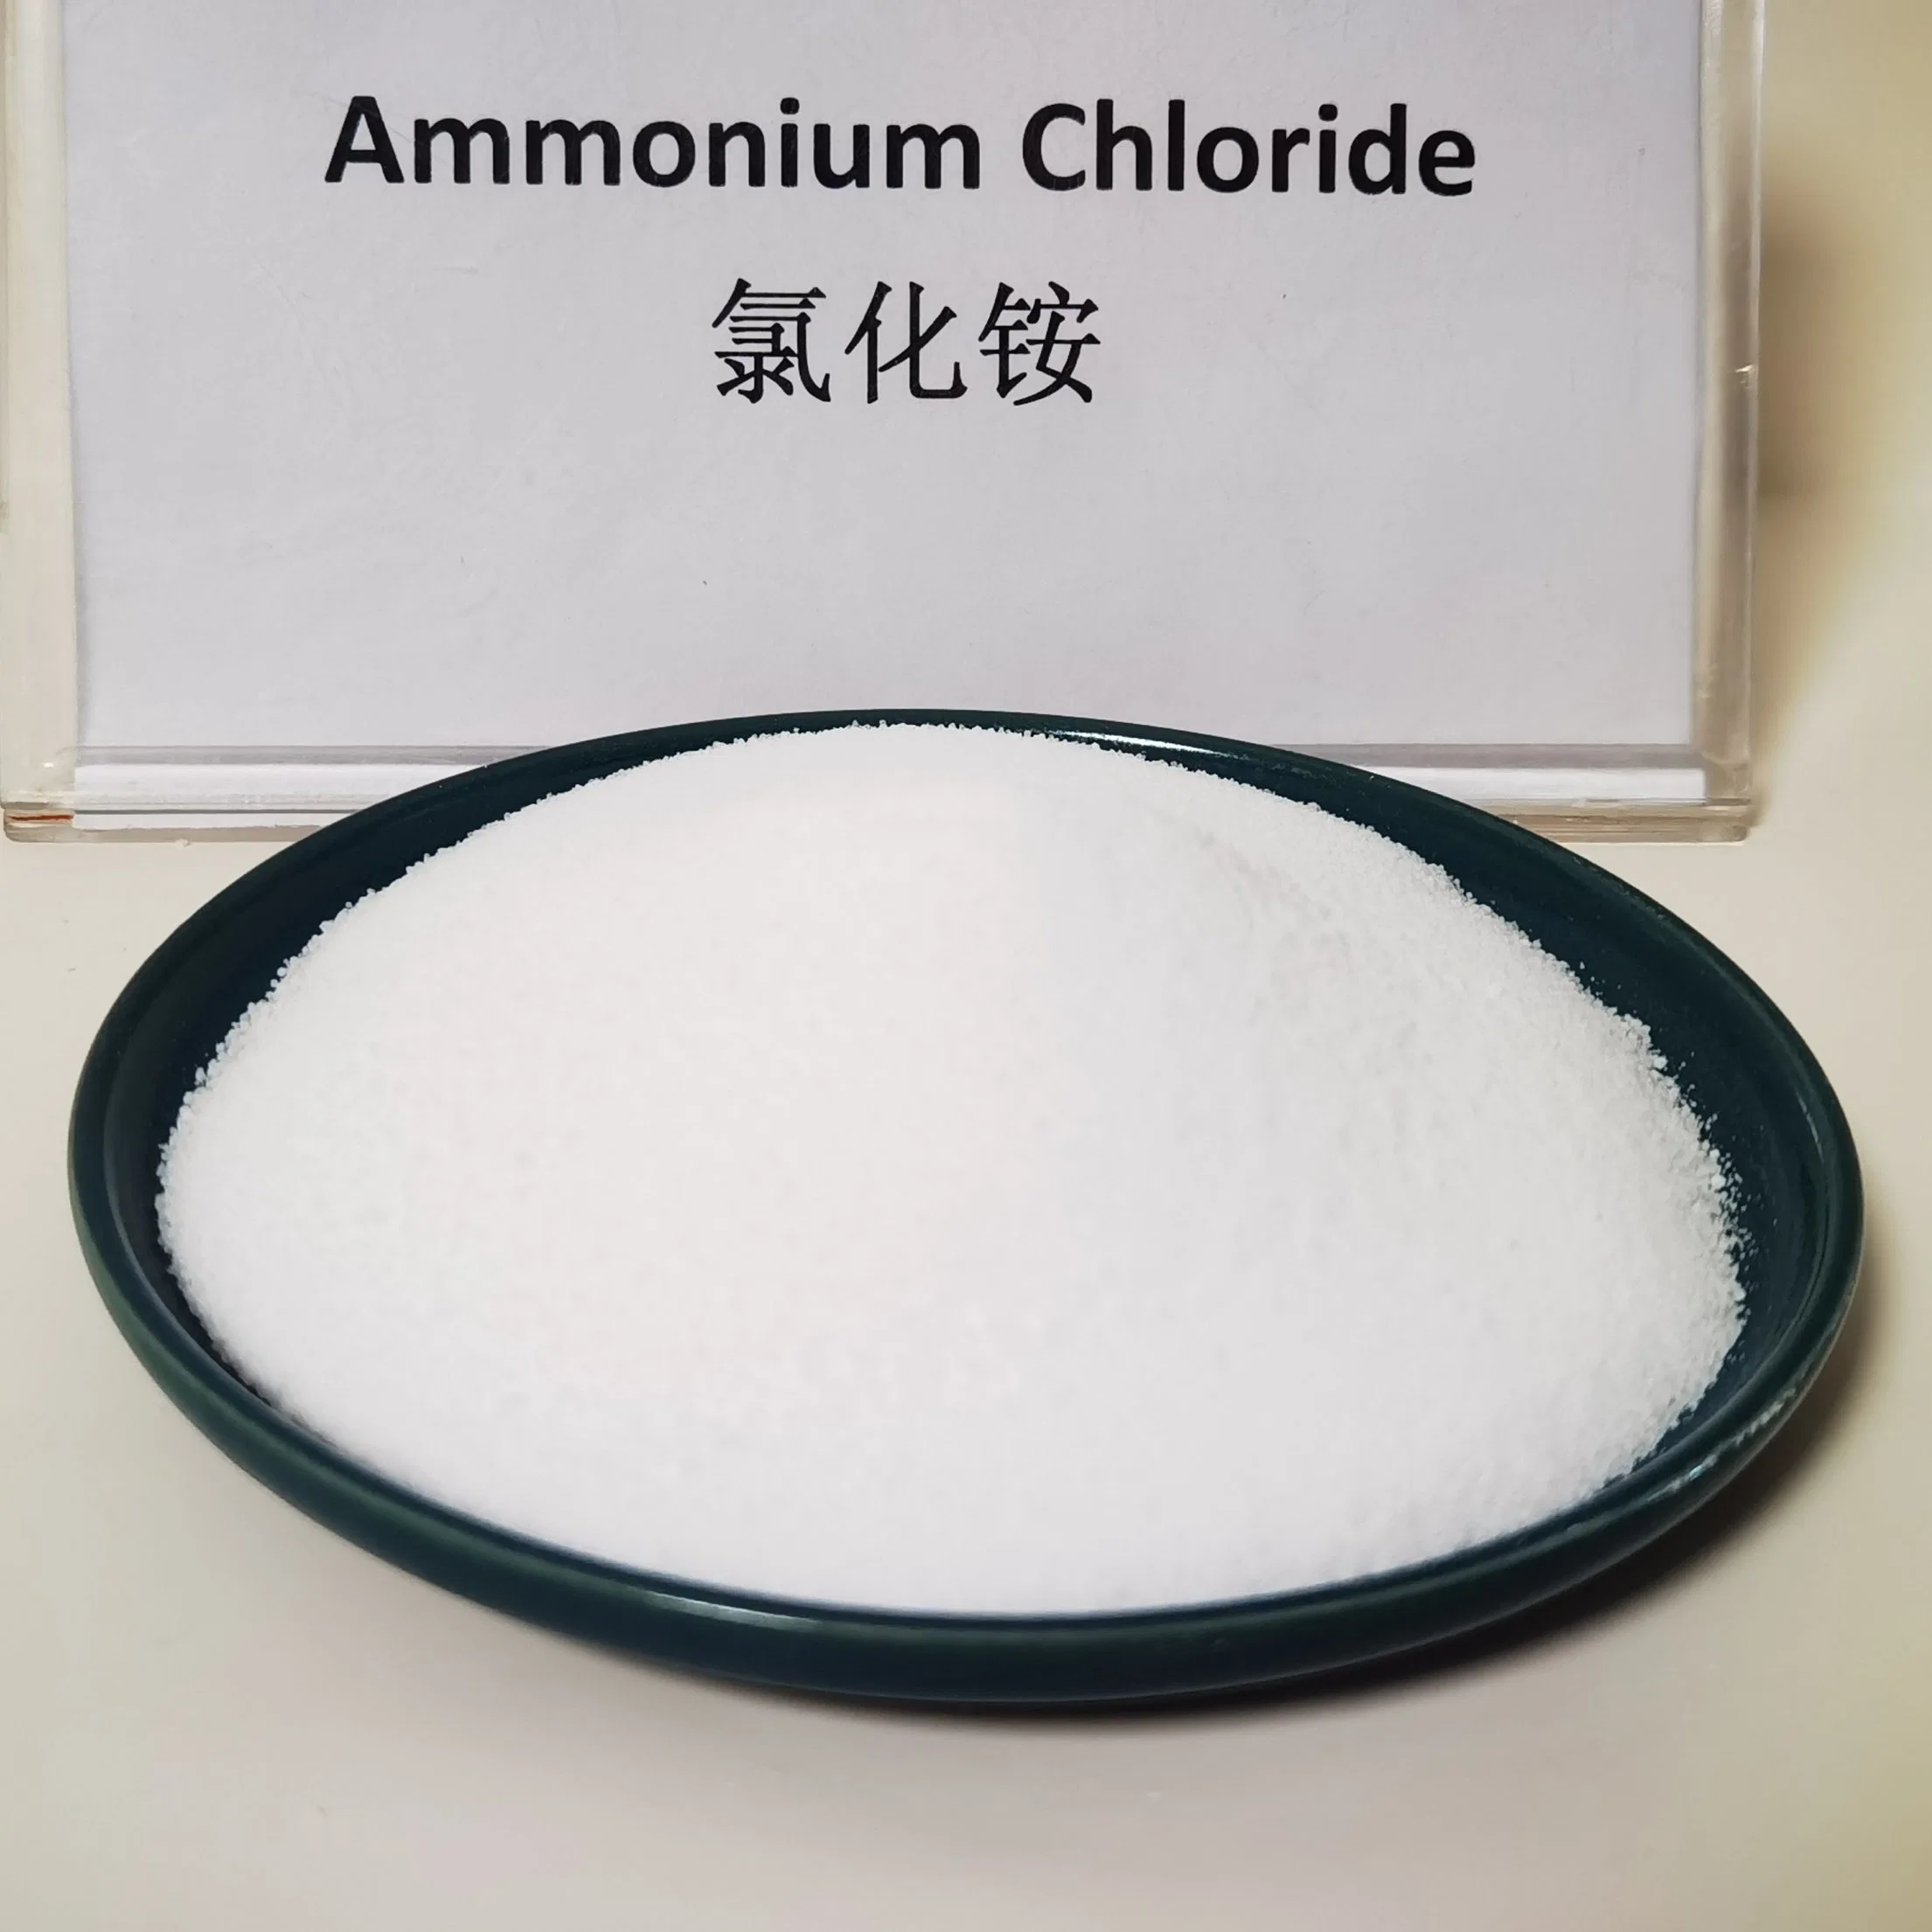 The Price of 99.5 Feed Grade Nh4cl Ammonium Chloride